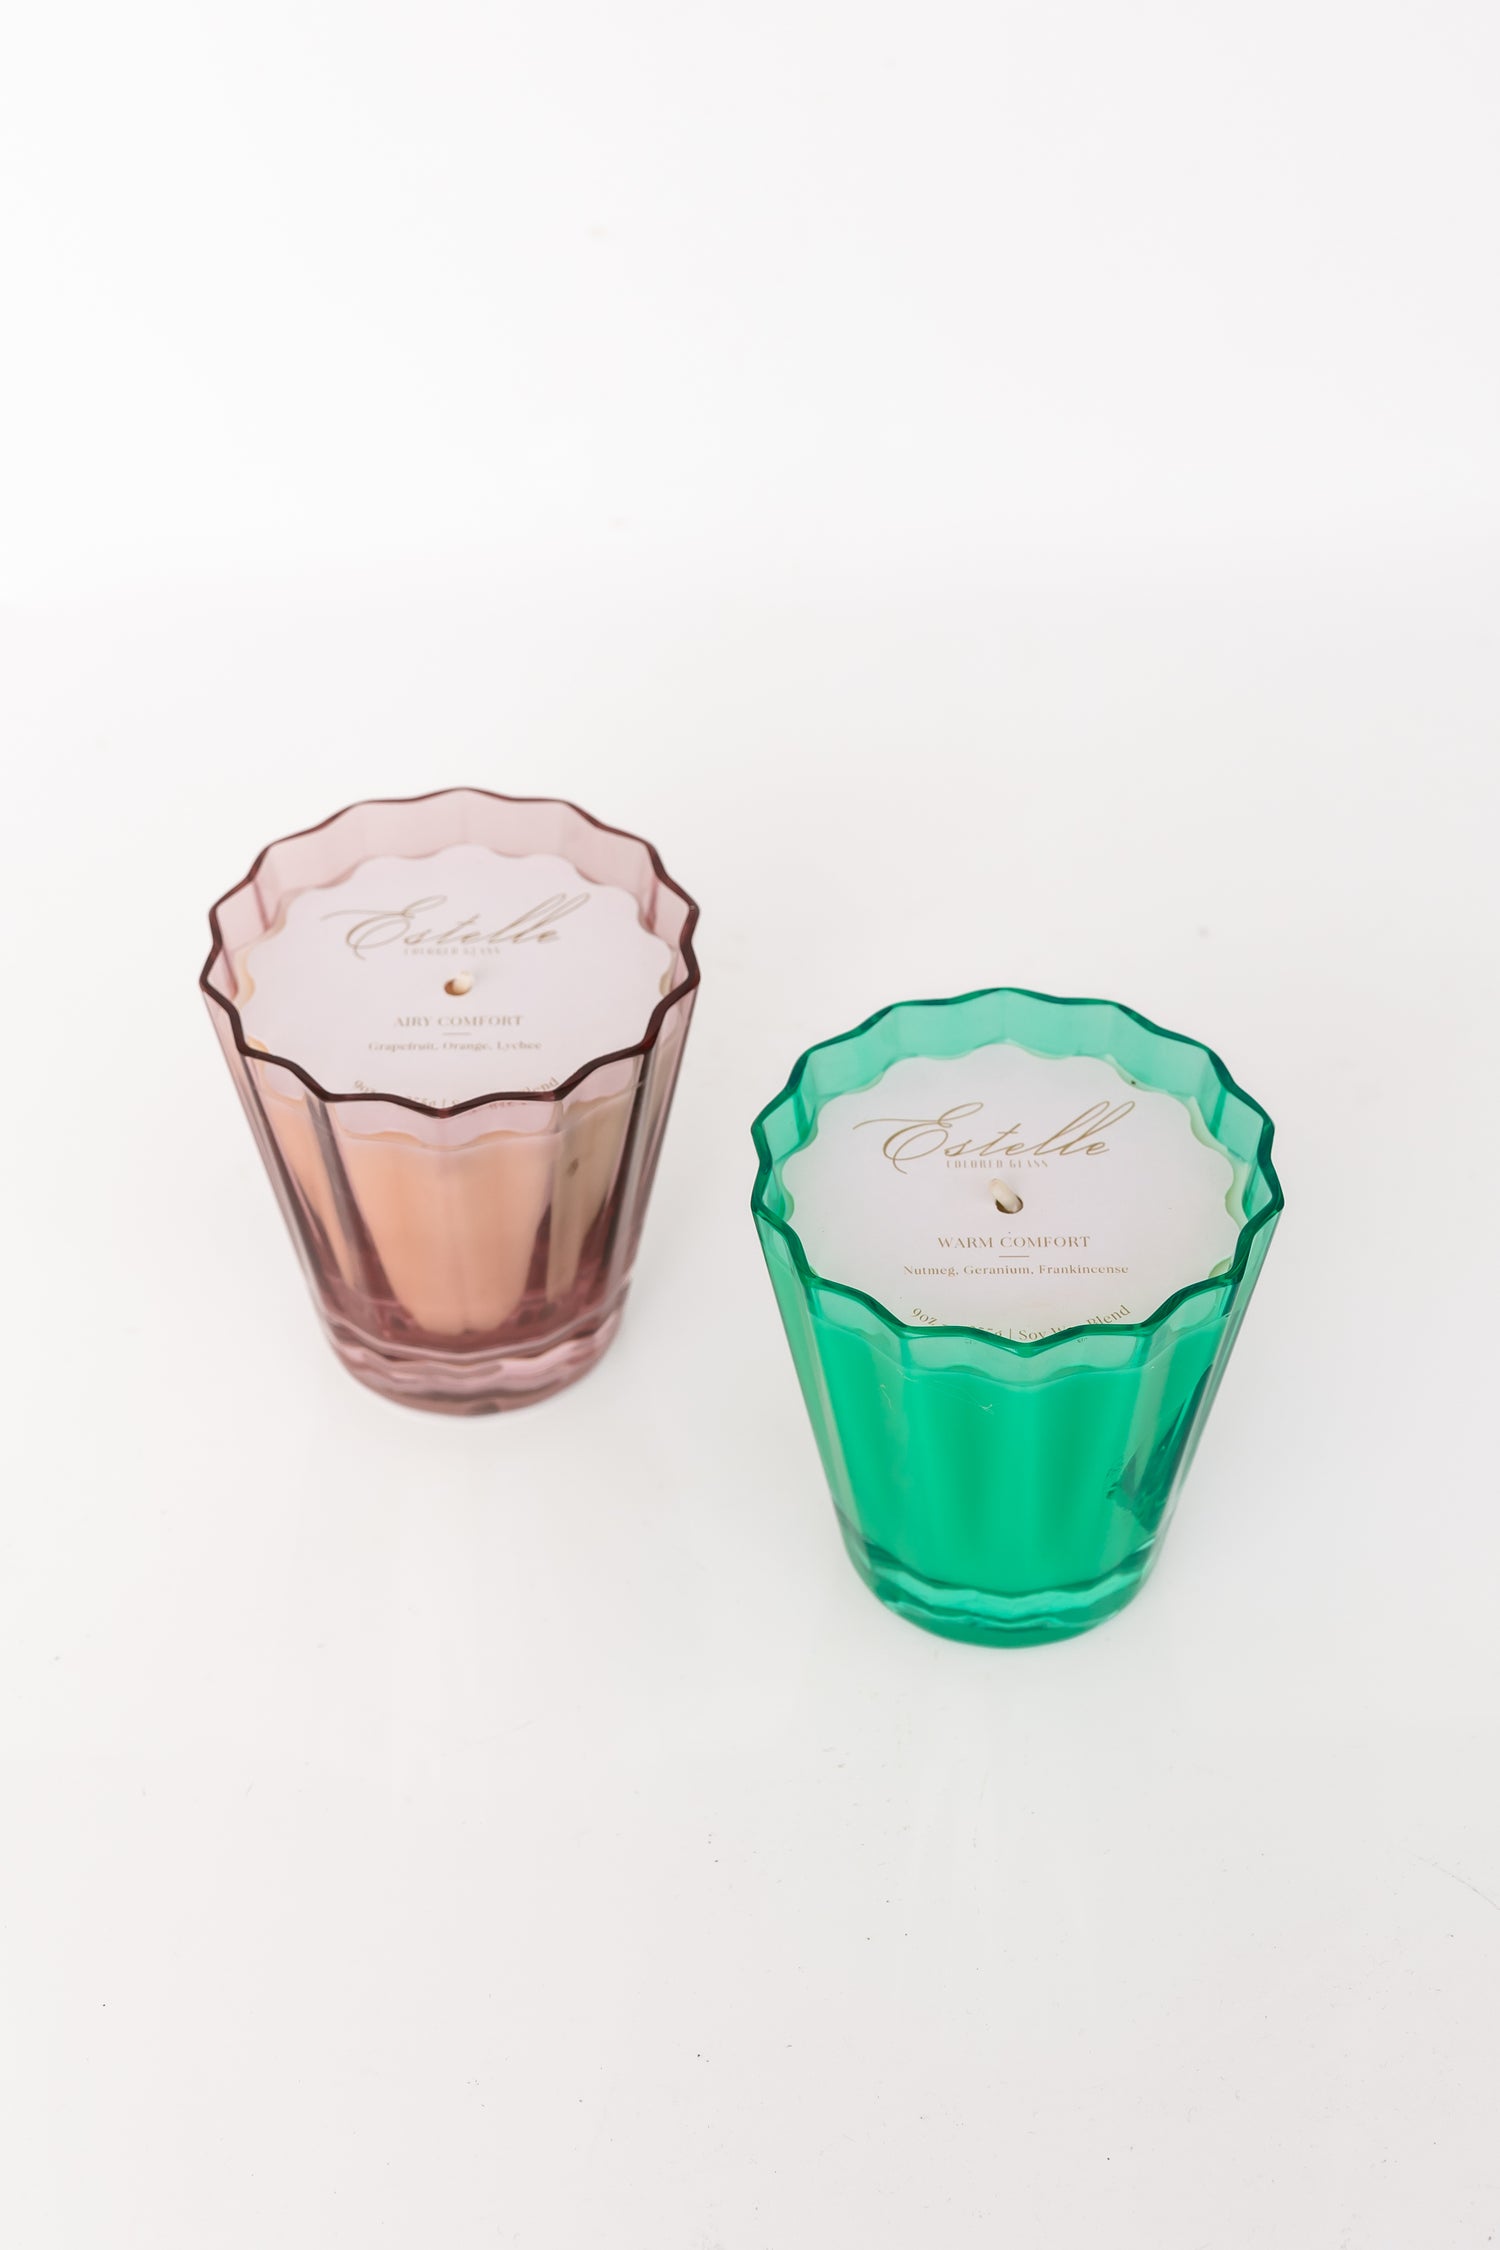 Estelle Colored Sunday Low Ball Candles  - Set of 2 {Rose + Kelly Green}